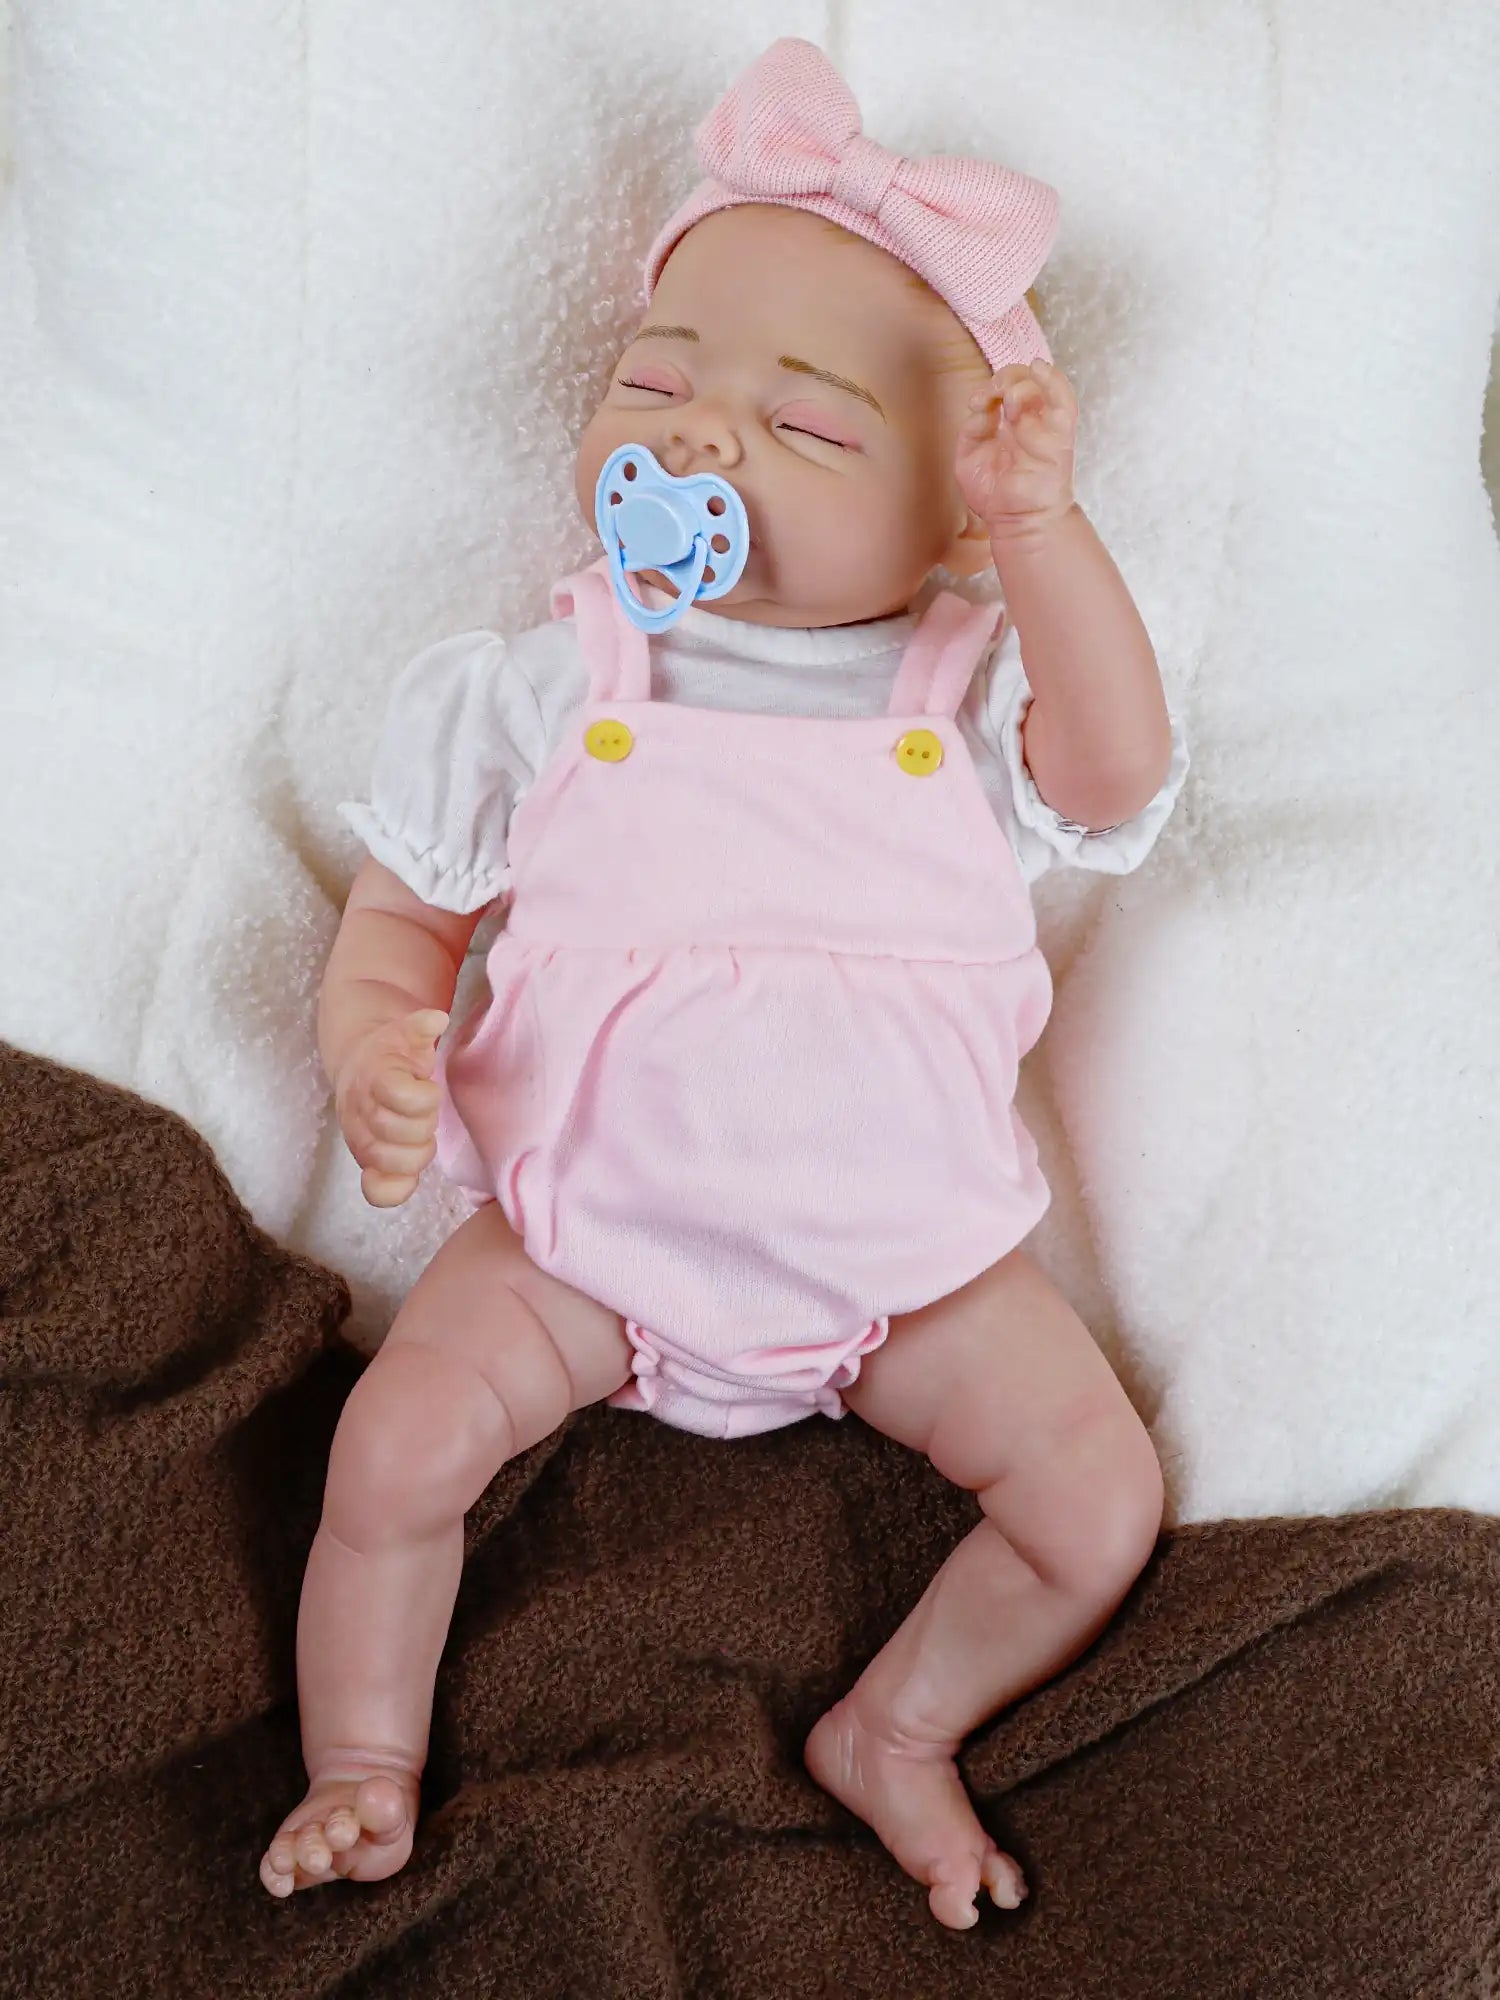 A peaceful reborn baby doll with a soft pink bow headband, gently holding a blue pacifier, lying on a fluffy white blanket.